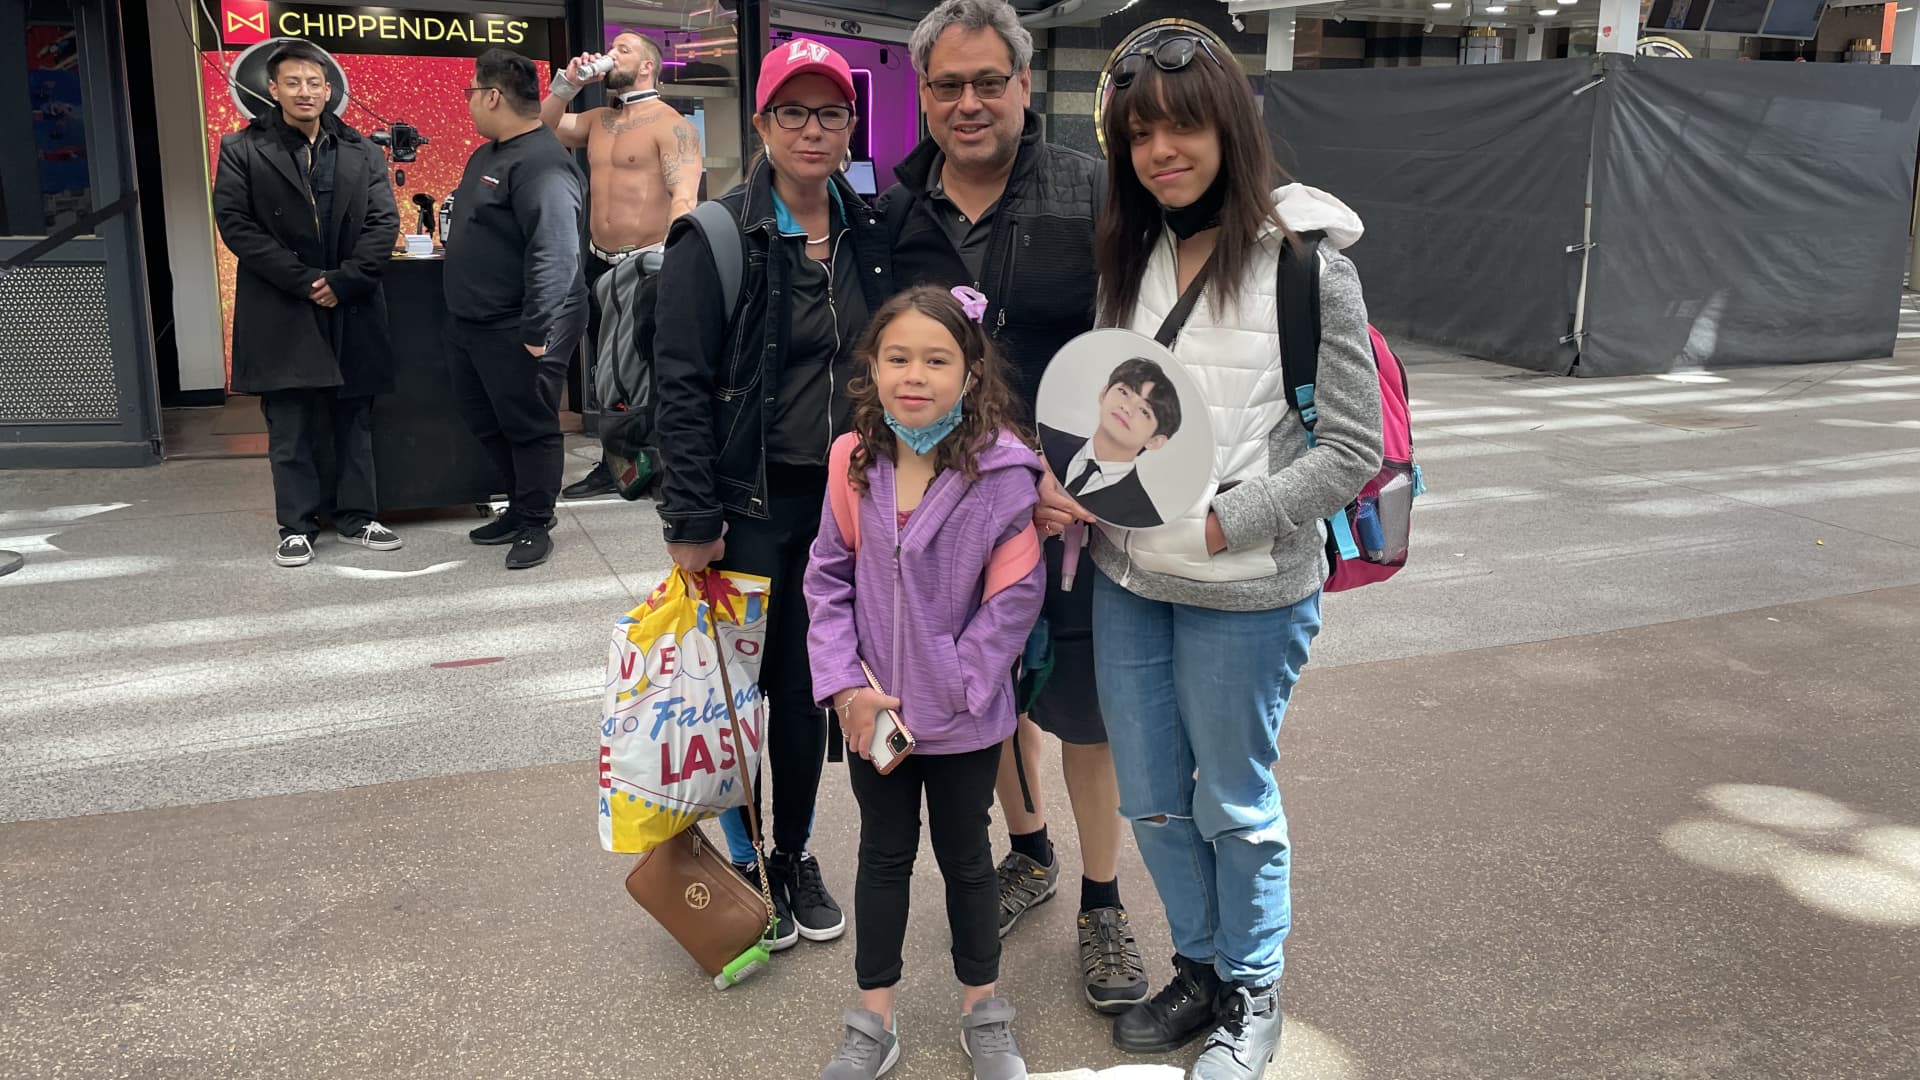 The Rojas family visiting Las Vegas from Colorado came to see the BTS concert at Allegiant stadium.  